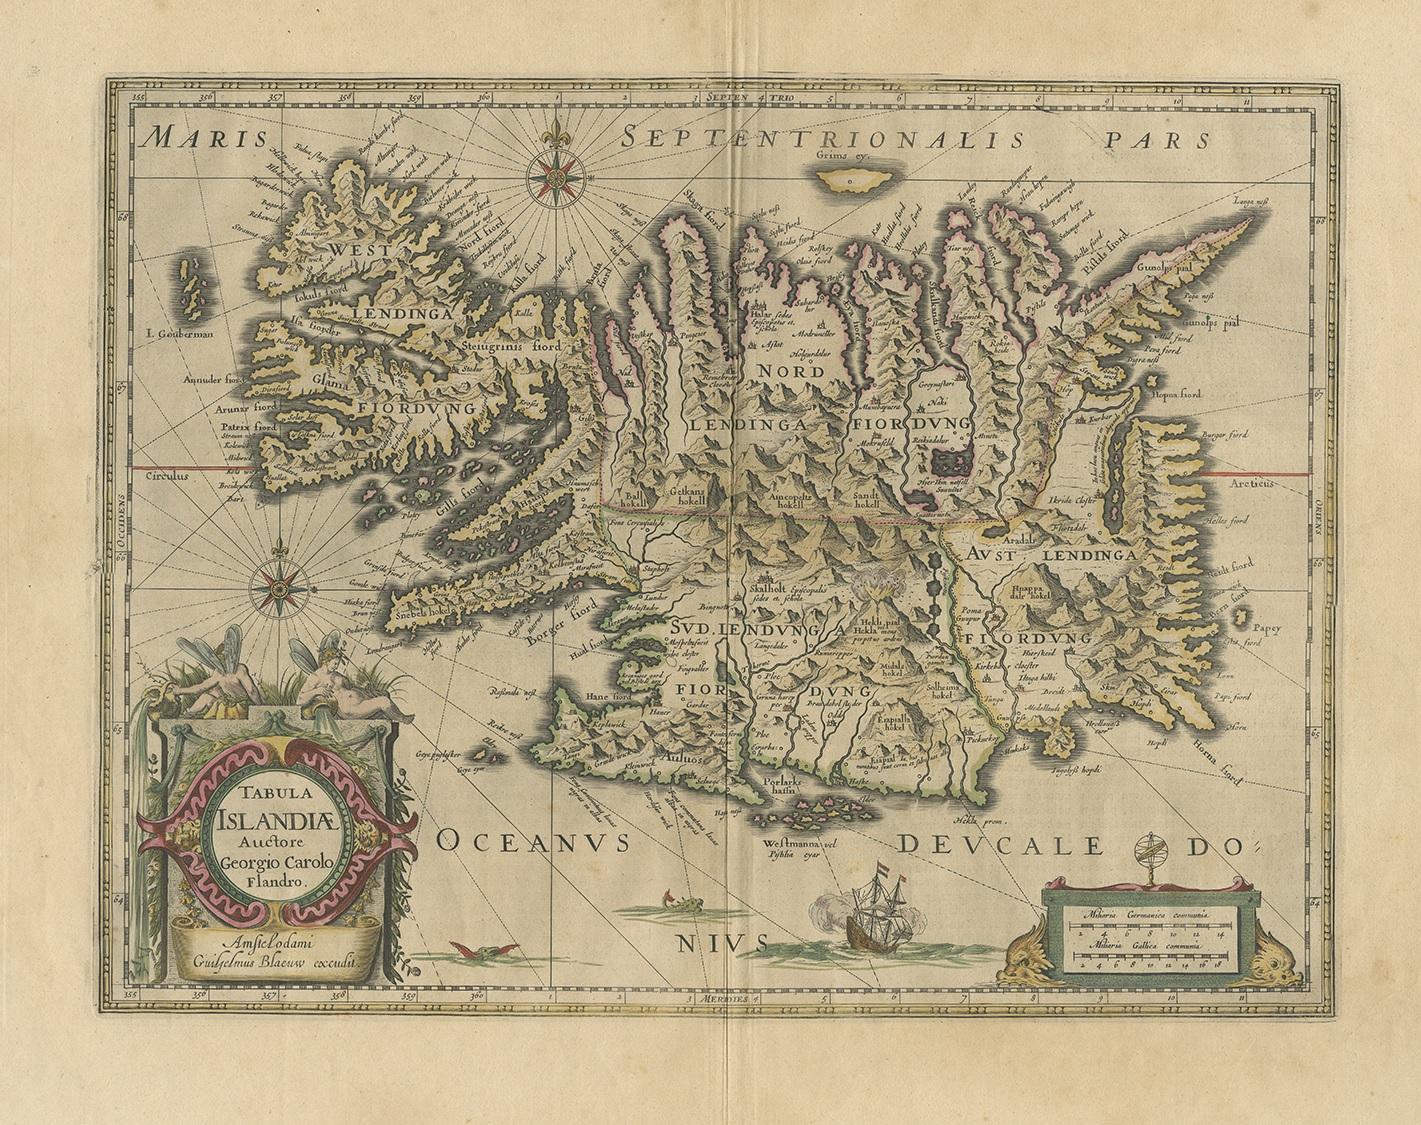 Antique map titled 'Tabula Islandiae'. Beautiful map of Iceland, including an erupting volcano, sea monsters, sailing ships, decorative cartouches, compass rose and the spectacular landscape of Iceland. Published by G. Blaeu, circa 1640.